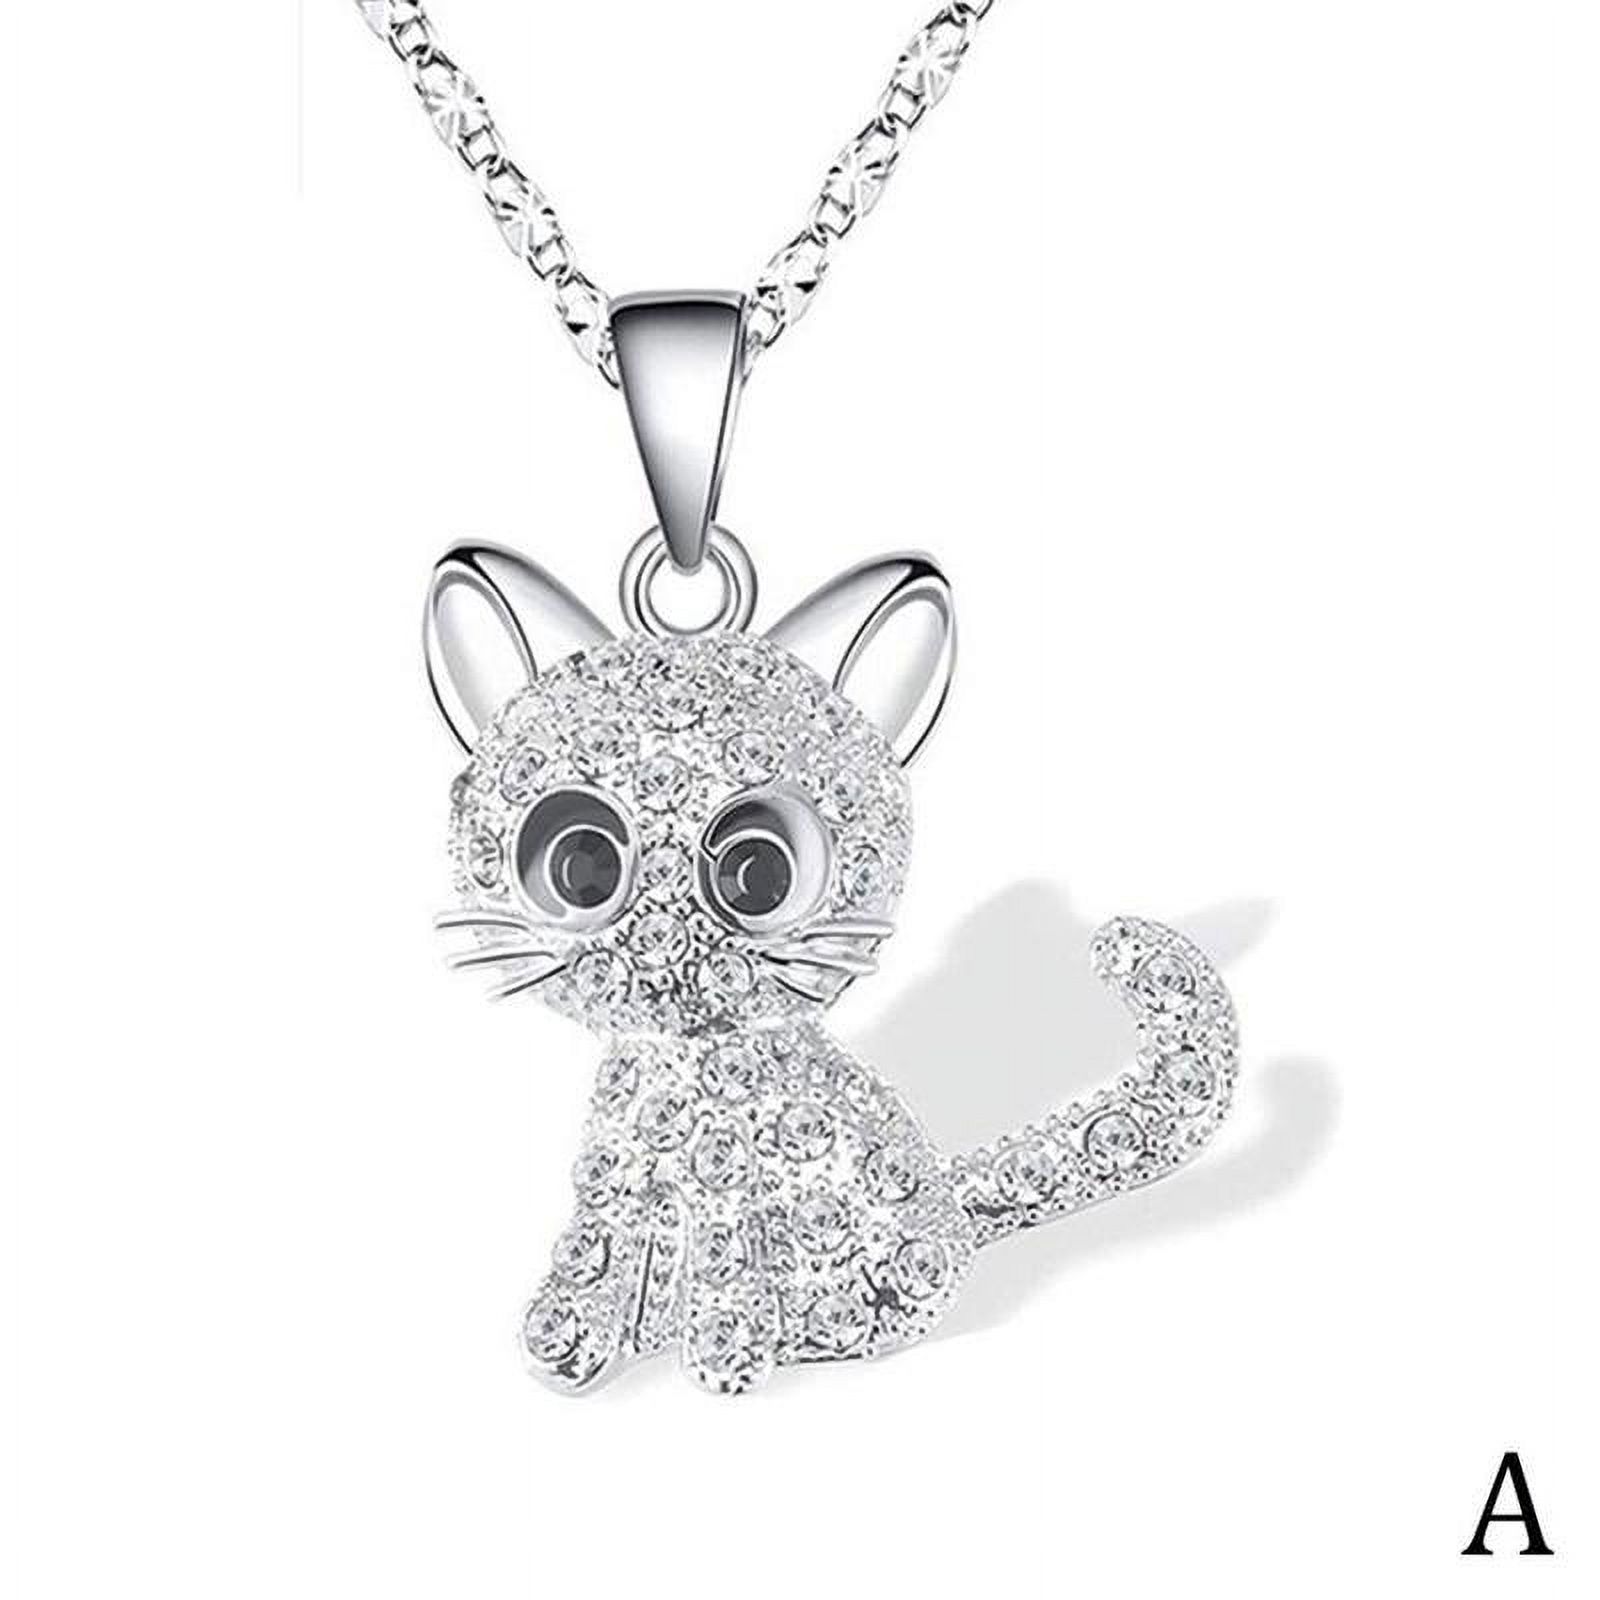 Cat Pendant Necklaces Diamond Kitty Chain Necklaces Colorful Crystal Cartoon Animal Necklaces Jewelry for Kids Girls Z7H3 - image 1 of 9